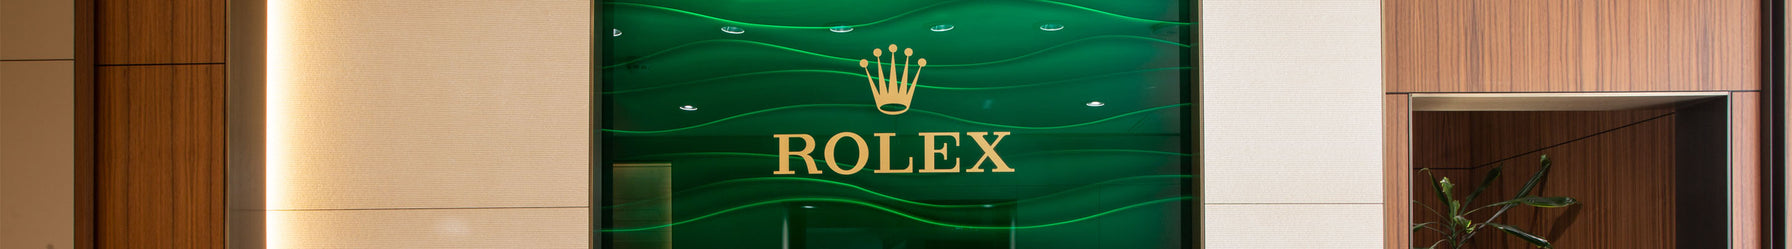 The Rolex logo that is visible on the wall of a Michael Spiers showroom